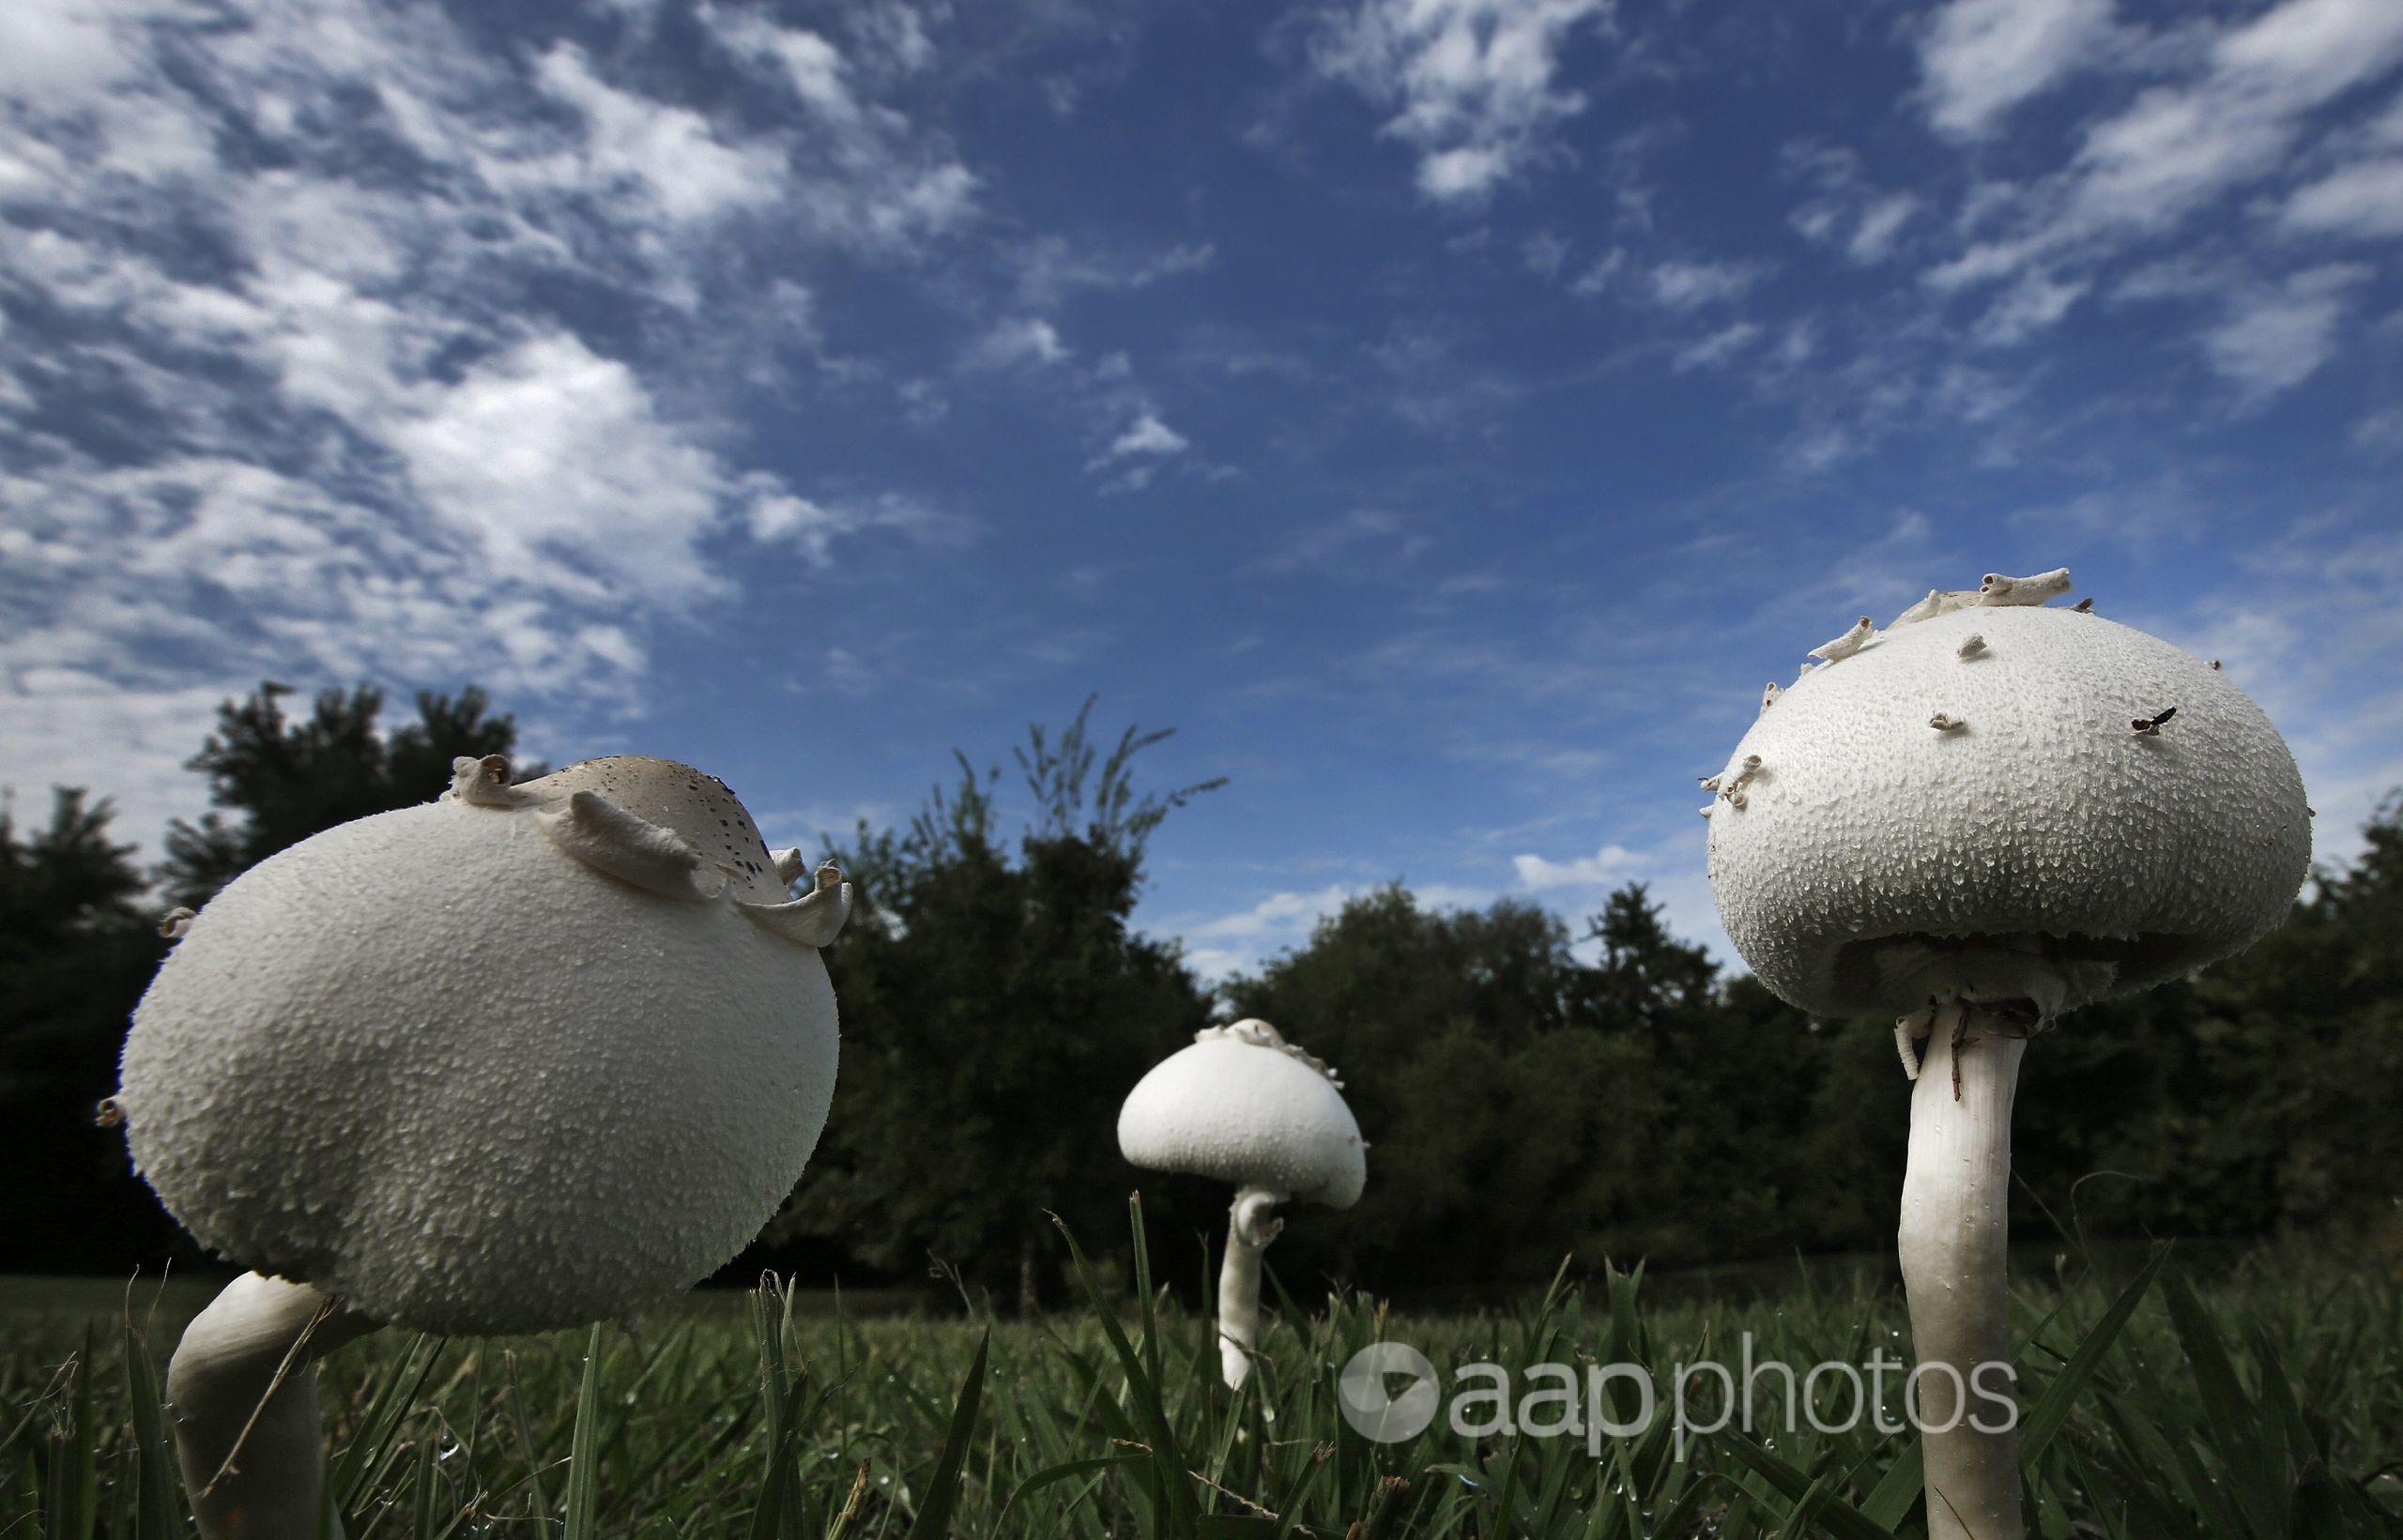 There's nothing magical about fake monster mushroom pic